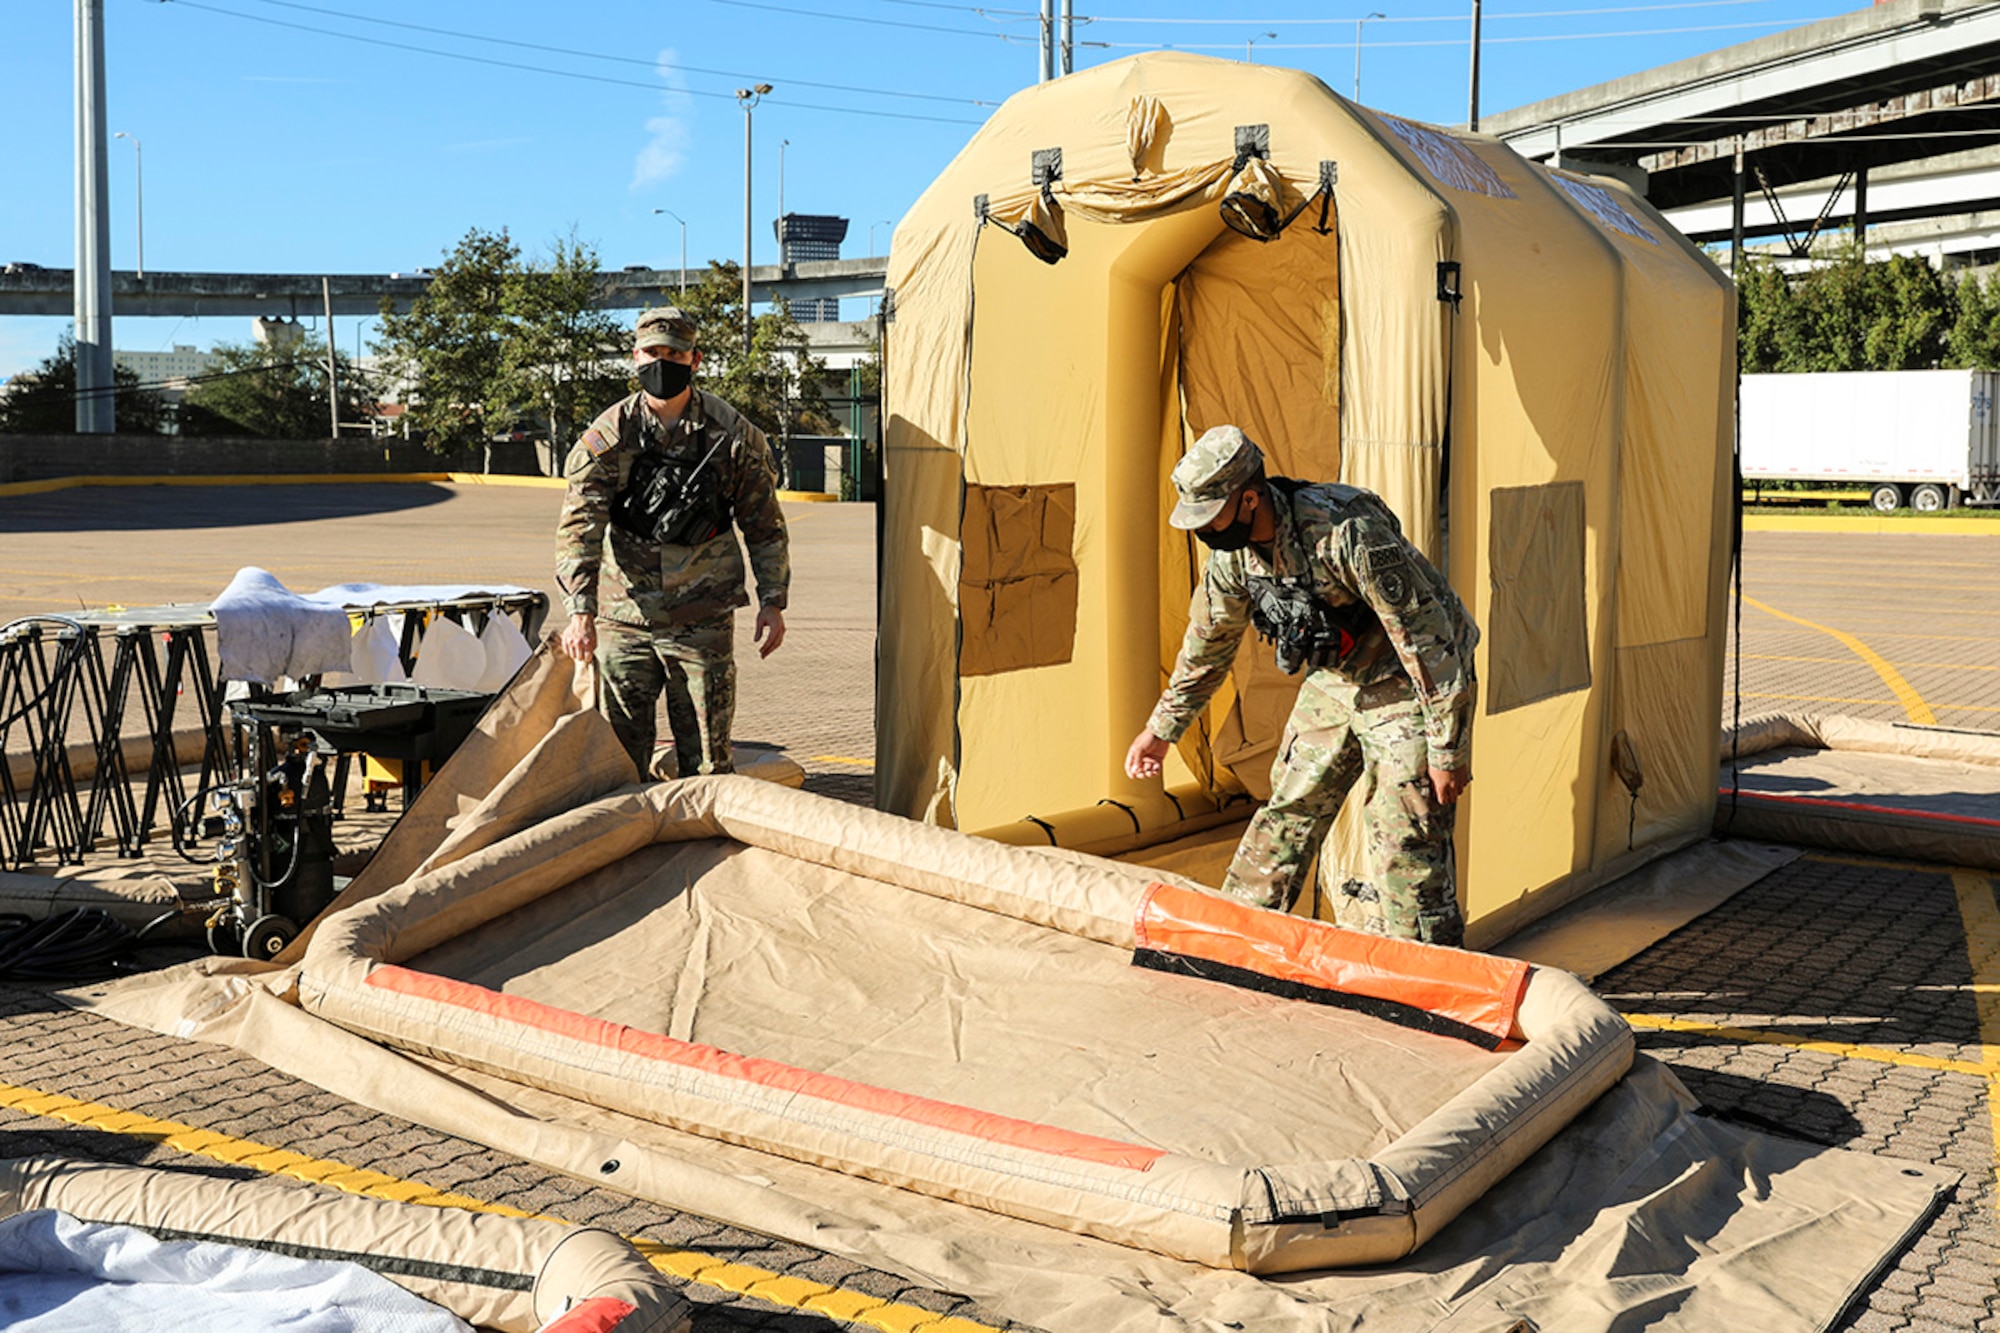 The Louisiana National Guard's 62nd Civil Support Team (CST) Weapons of Mass Destruction sets up a decontamination line as part of a joint simulated training exercise with the Iowa National Guard’s 71st CST in New Orleans, Jan. 11, 2022.